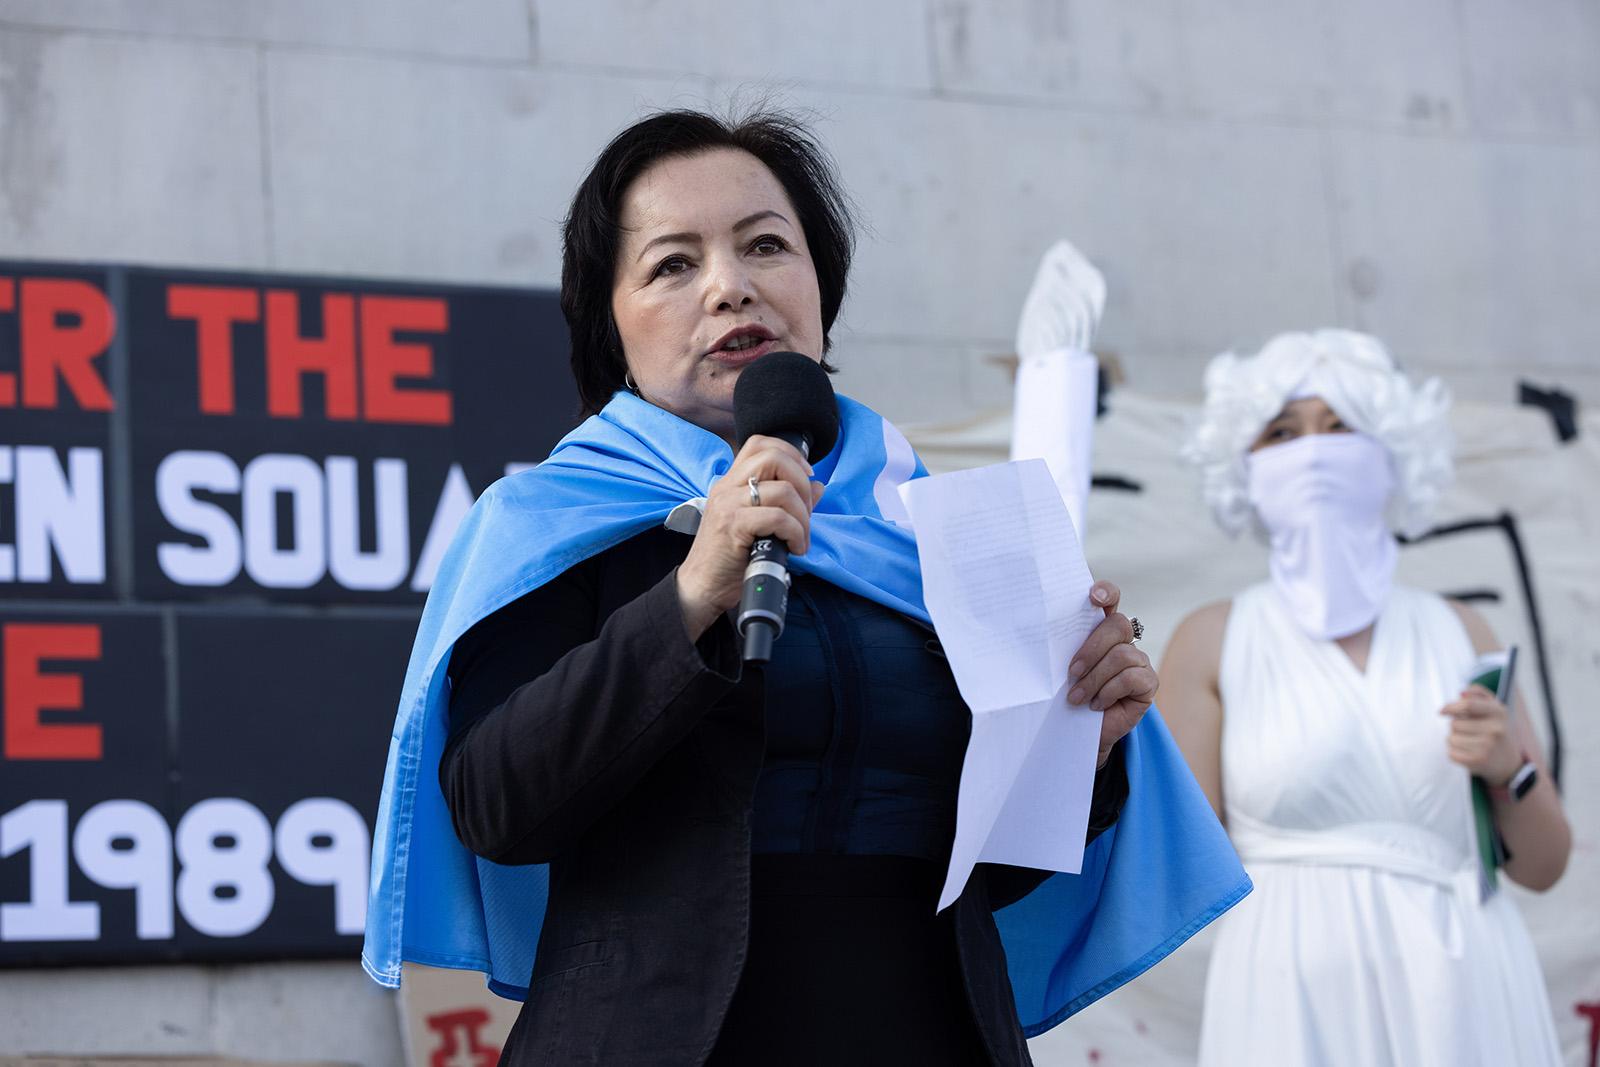 Rahima Mahmut, the director of World Uyghur Congress, speaking on 4 June 2023 at a Trafalgar Square rally organised by China Deviants to mark the 34th anniversary of the Tiananmen Massacre in 1989 in Beijing.